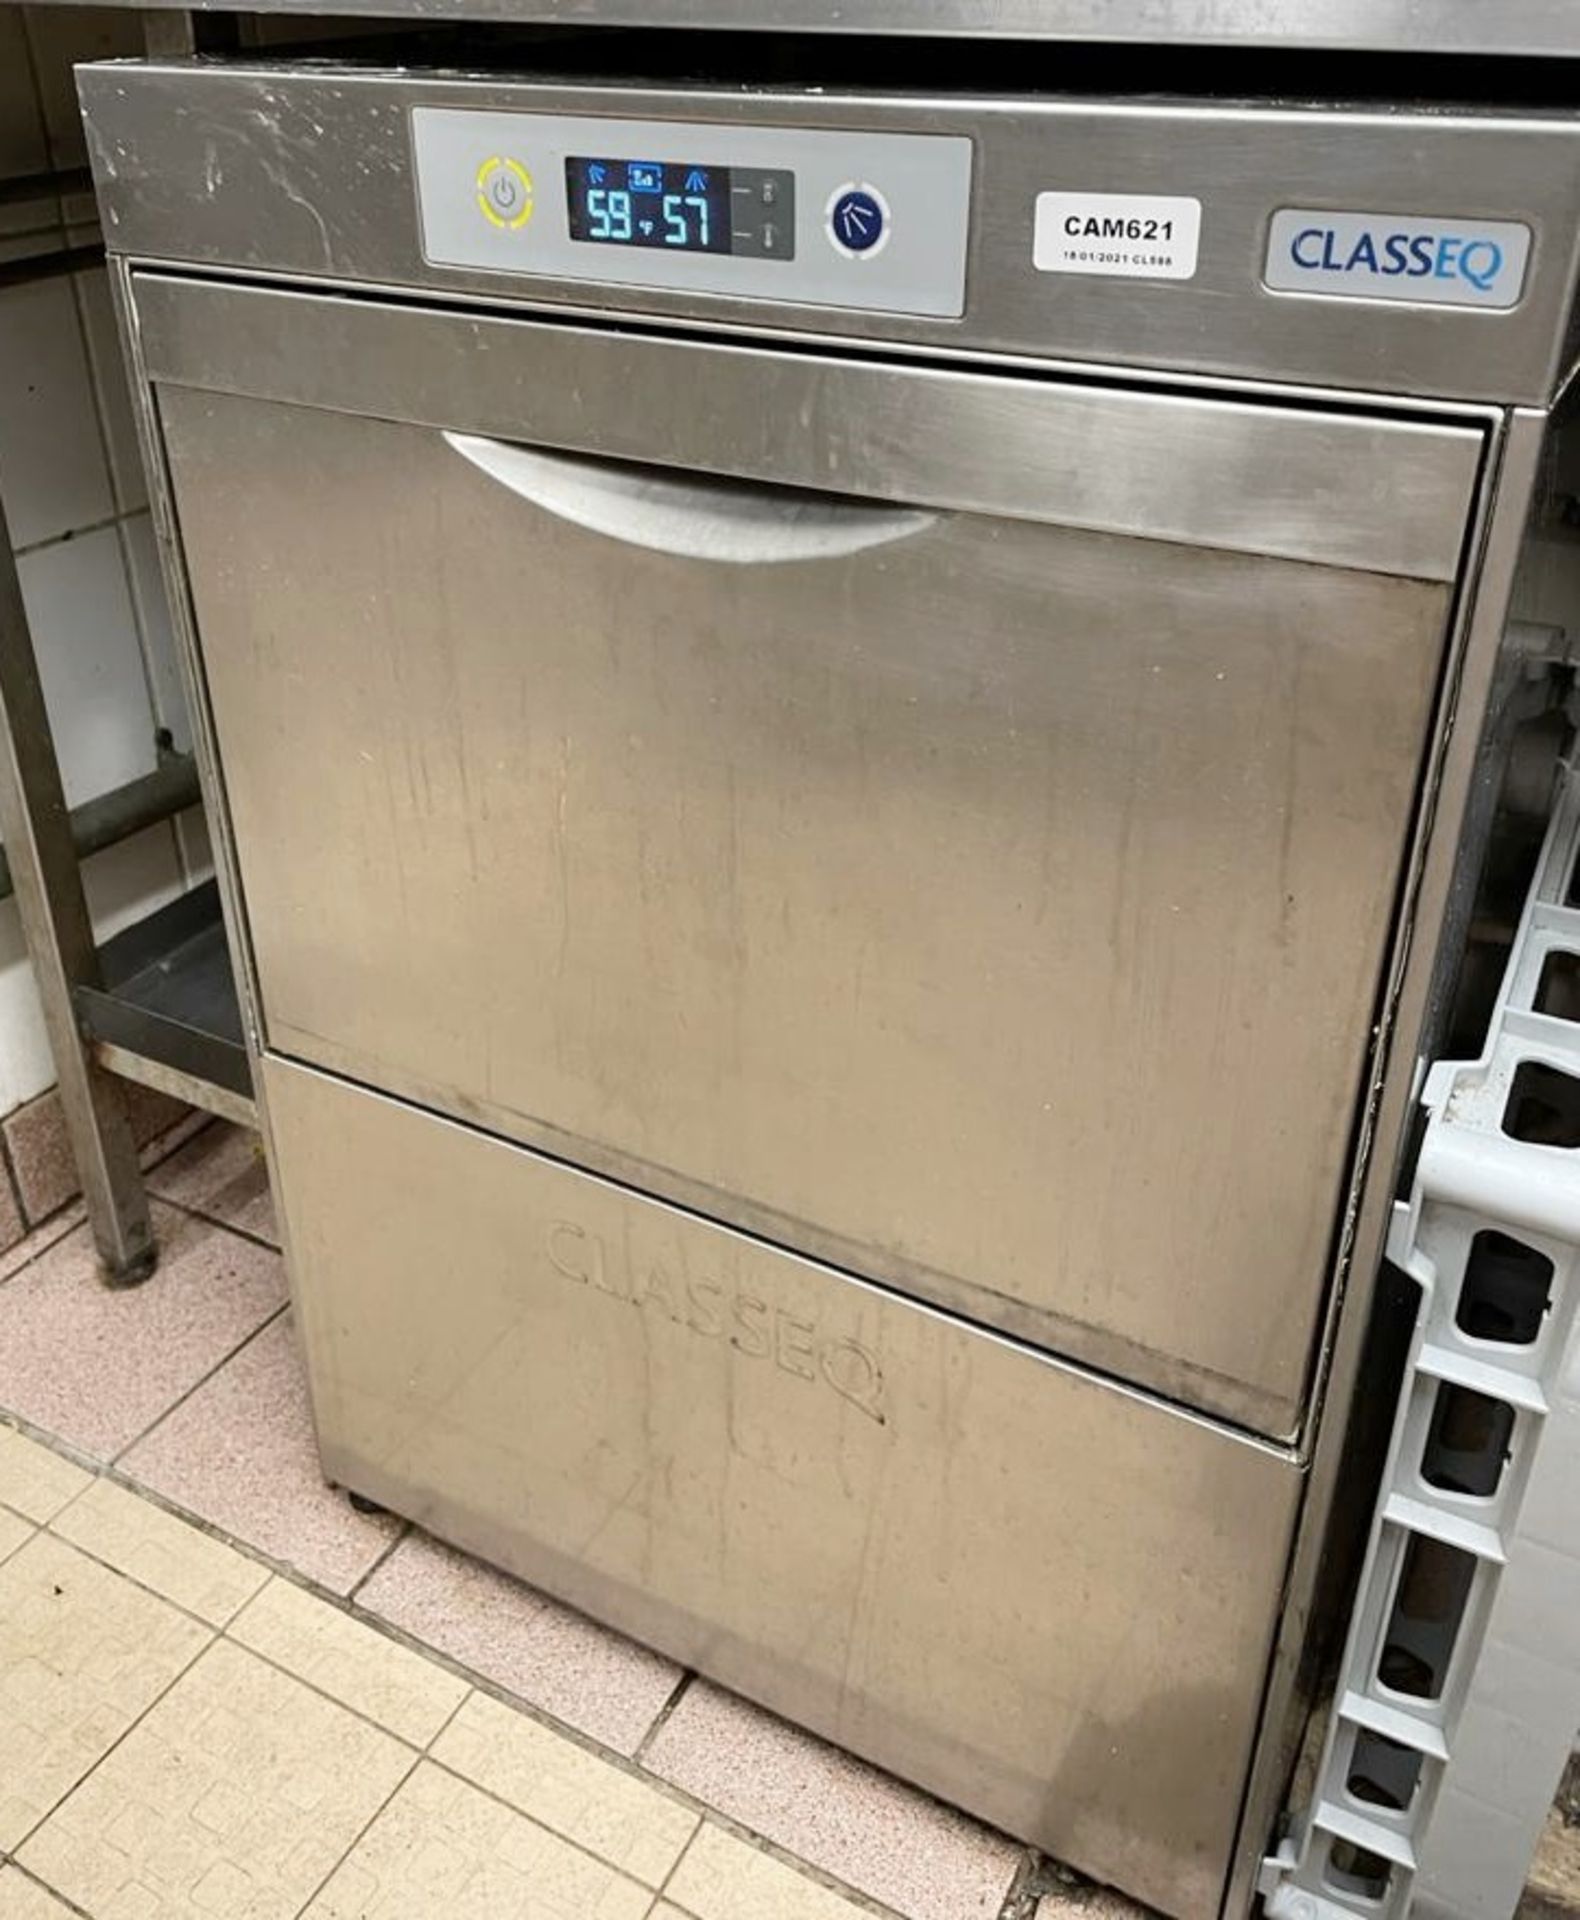 1 x CLASS EQ D500 DUO Commercial Undercounter Dishwasher - Ref: CAM621 - Location: London SW1P